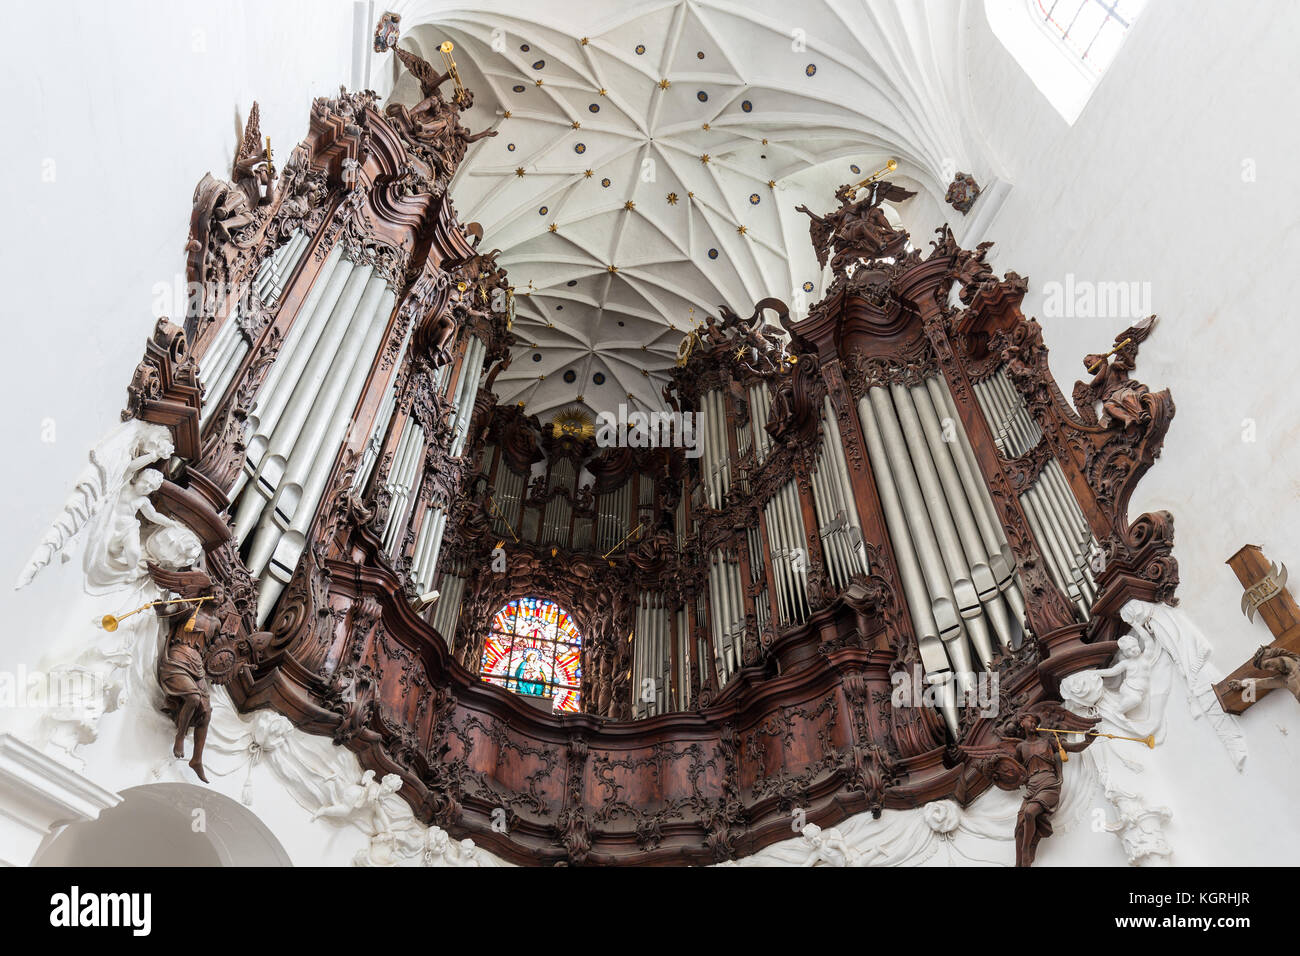 Great Oliwa organ at the Oliwa Archcathedral in Gdansk, Poland, viewed from below. Stock Photo